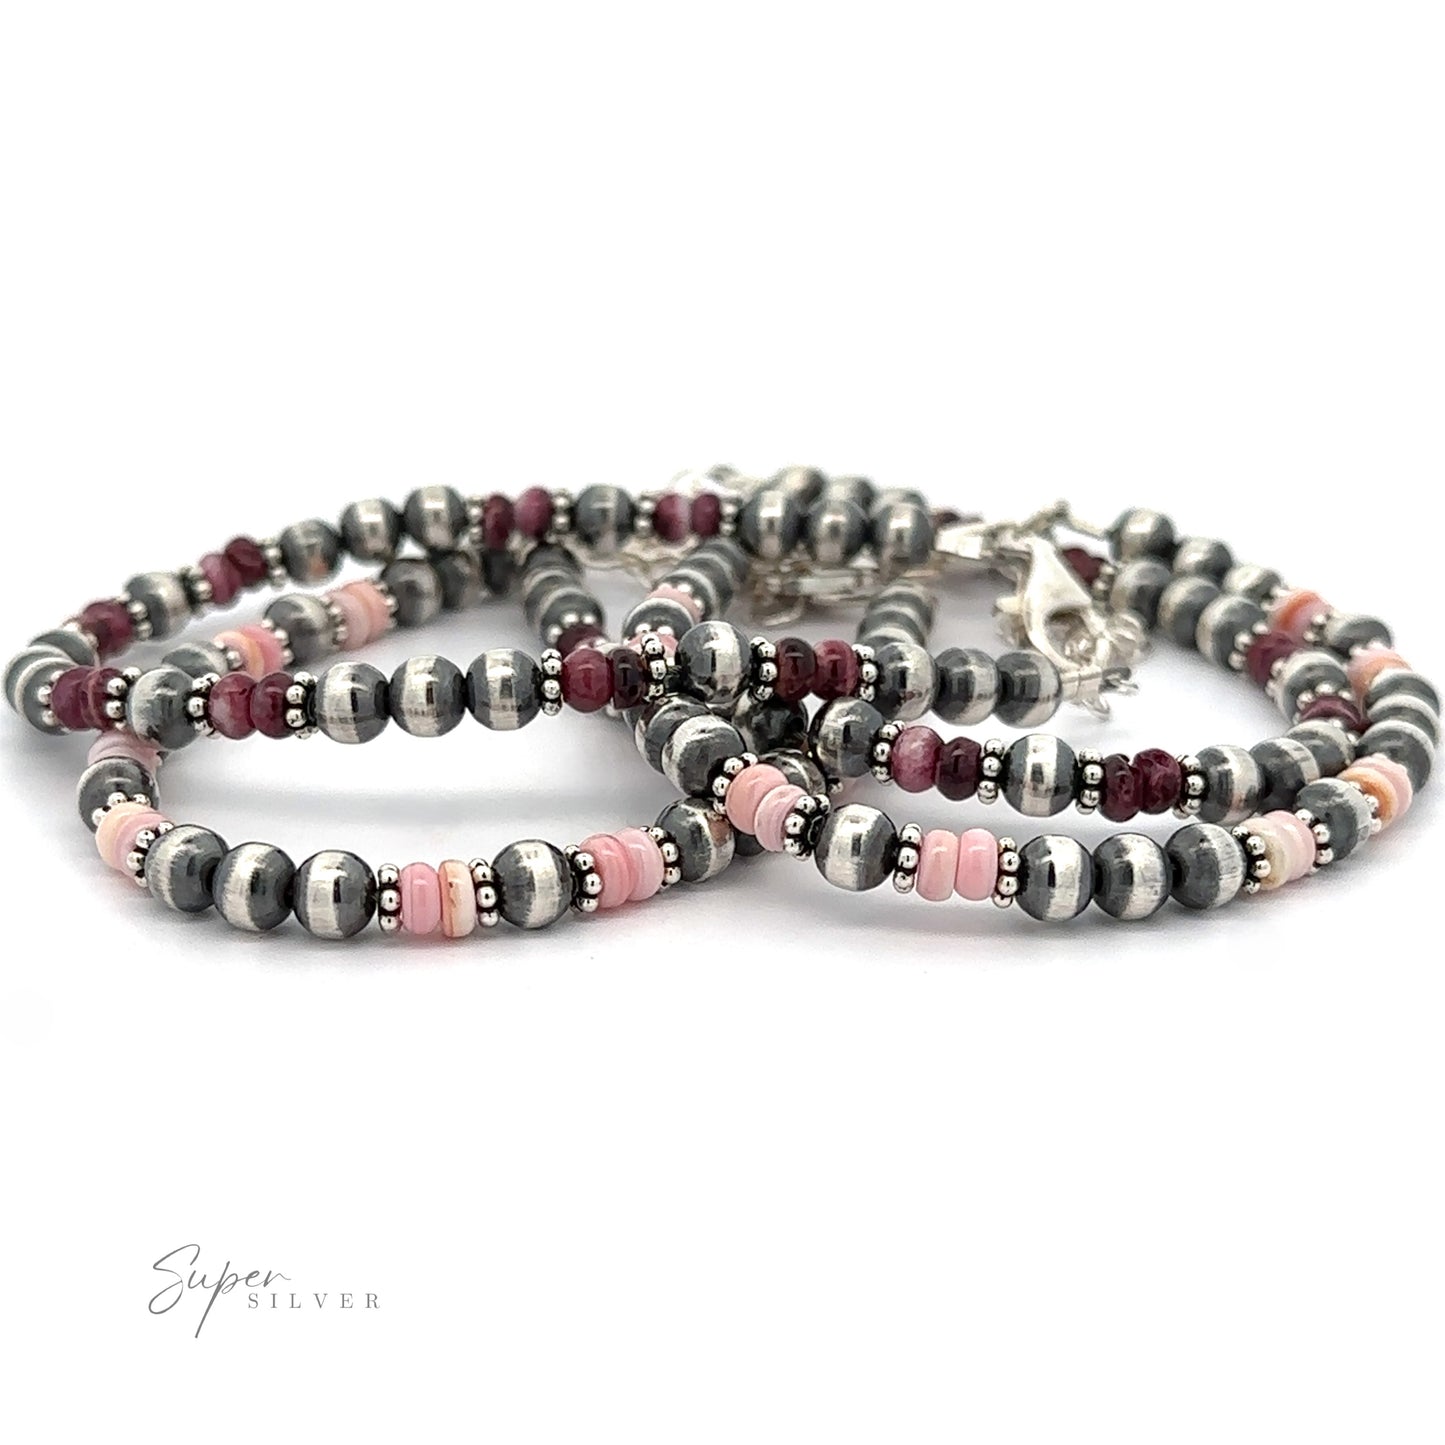 A bracelet made of silver and pink beads, featuring a toggle clasp, inspired by Native American Shell and Navajo Pearl bracelets, displayed against a white background.